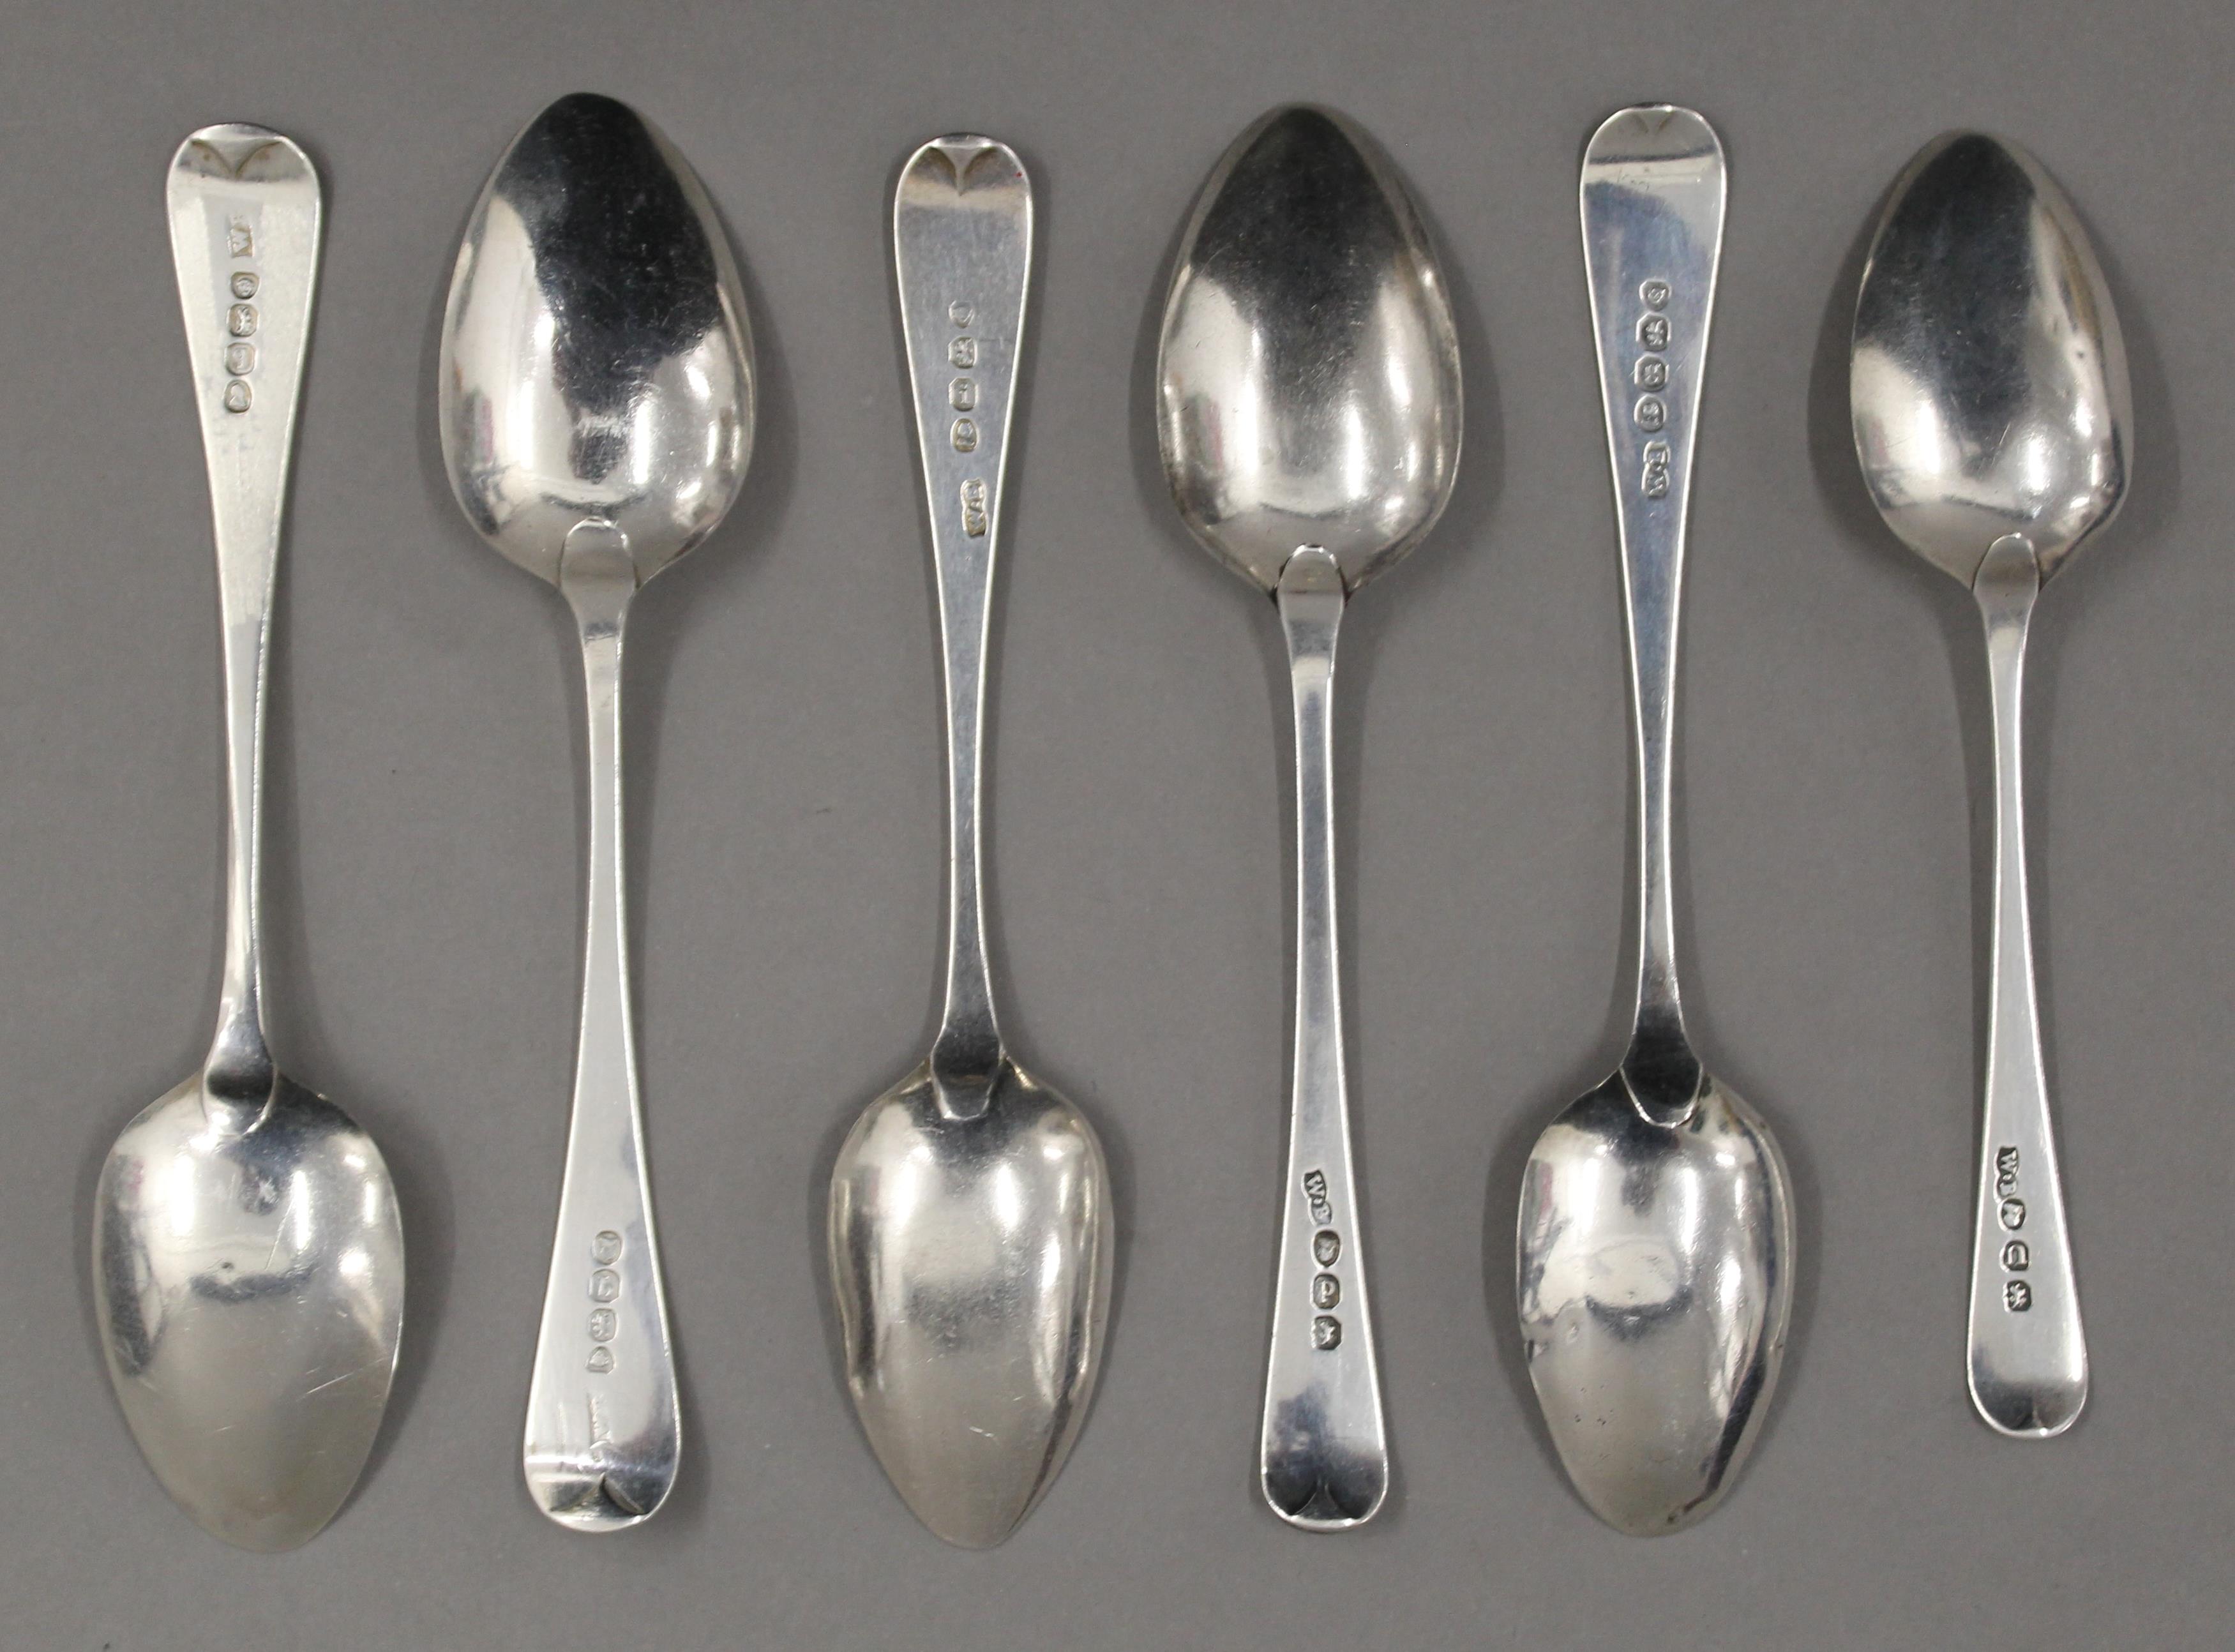 Six early 19th century Old English pattern teaspoons by William Bateman of London. 95.7 grammes. - Image 3 of 6